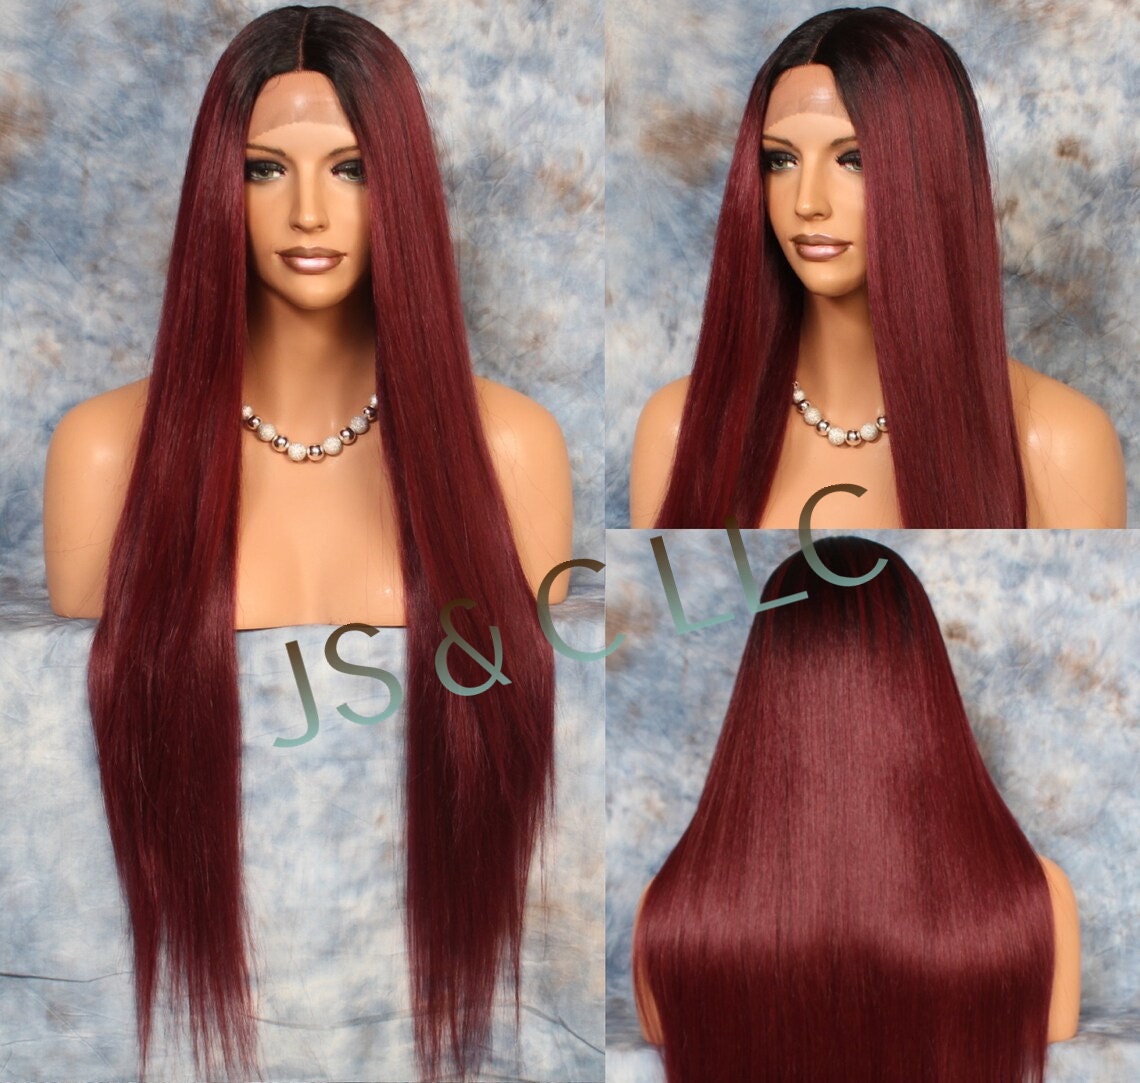 45 Human Hair Blend Lace Front Wig Hand Tied Center Part Straight Heat Safe Solid Burgundy Mix Cancer/Alopecia/Cosplay/Emo/Theater